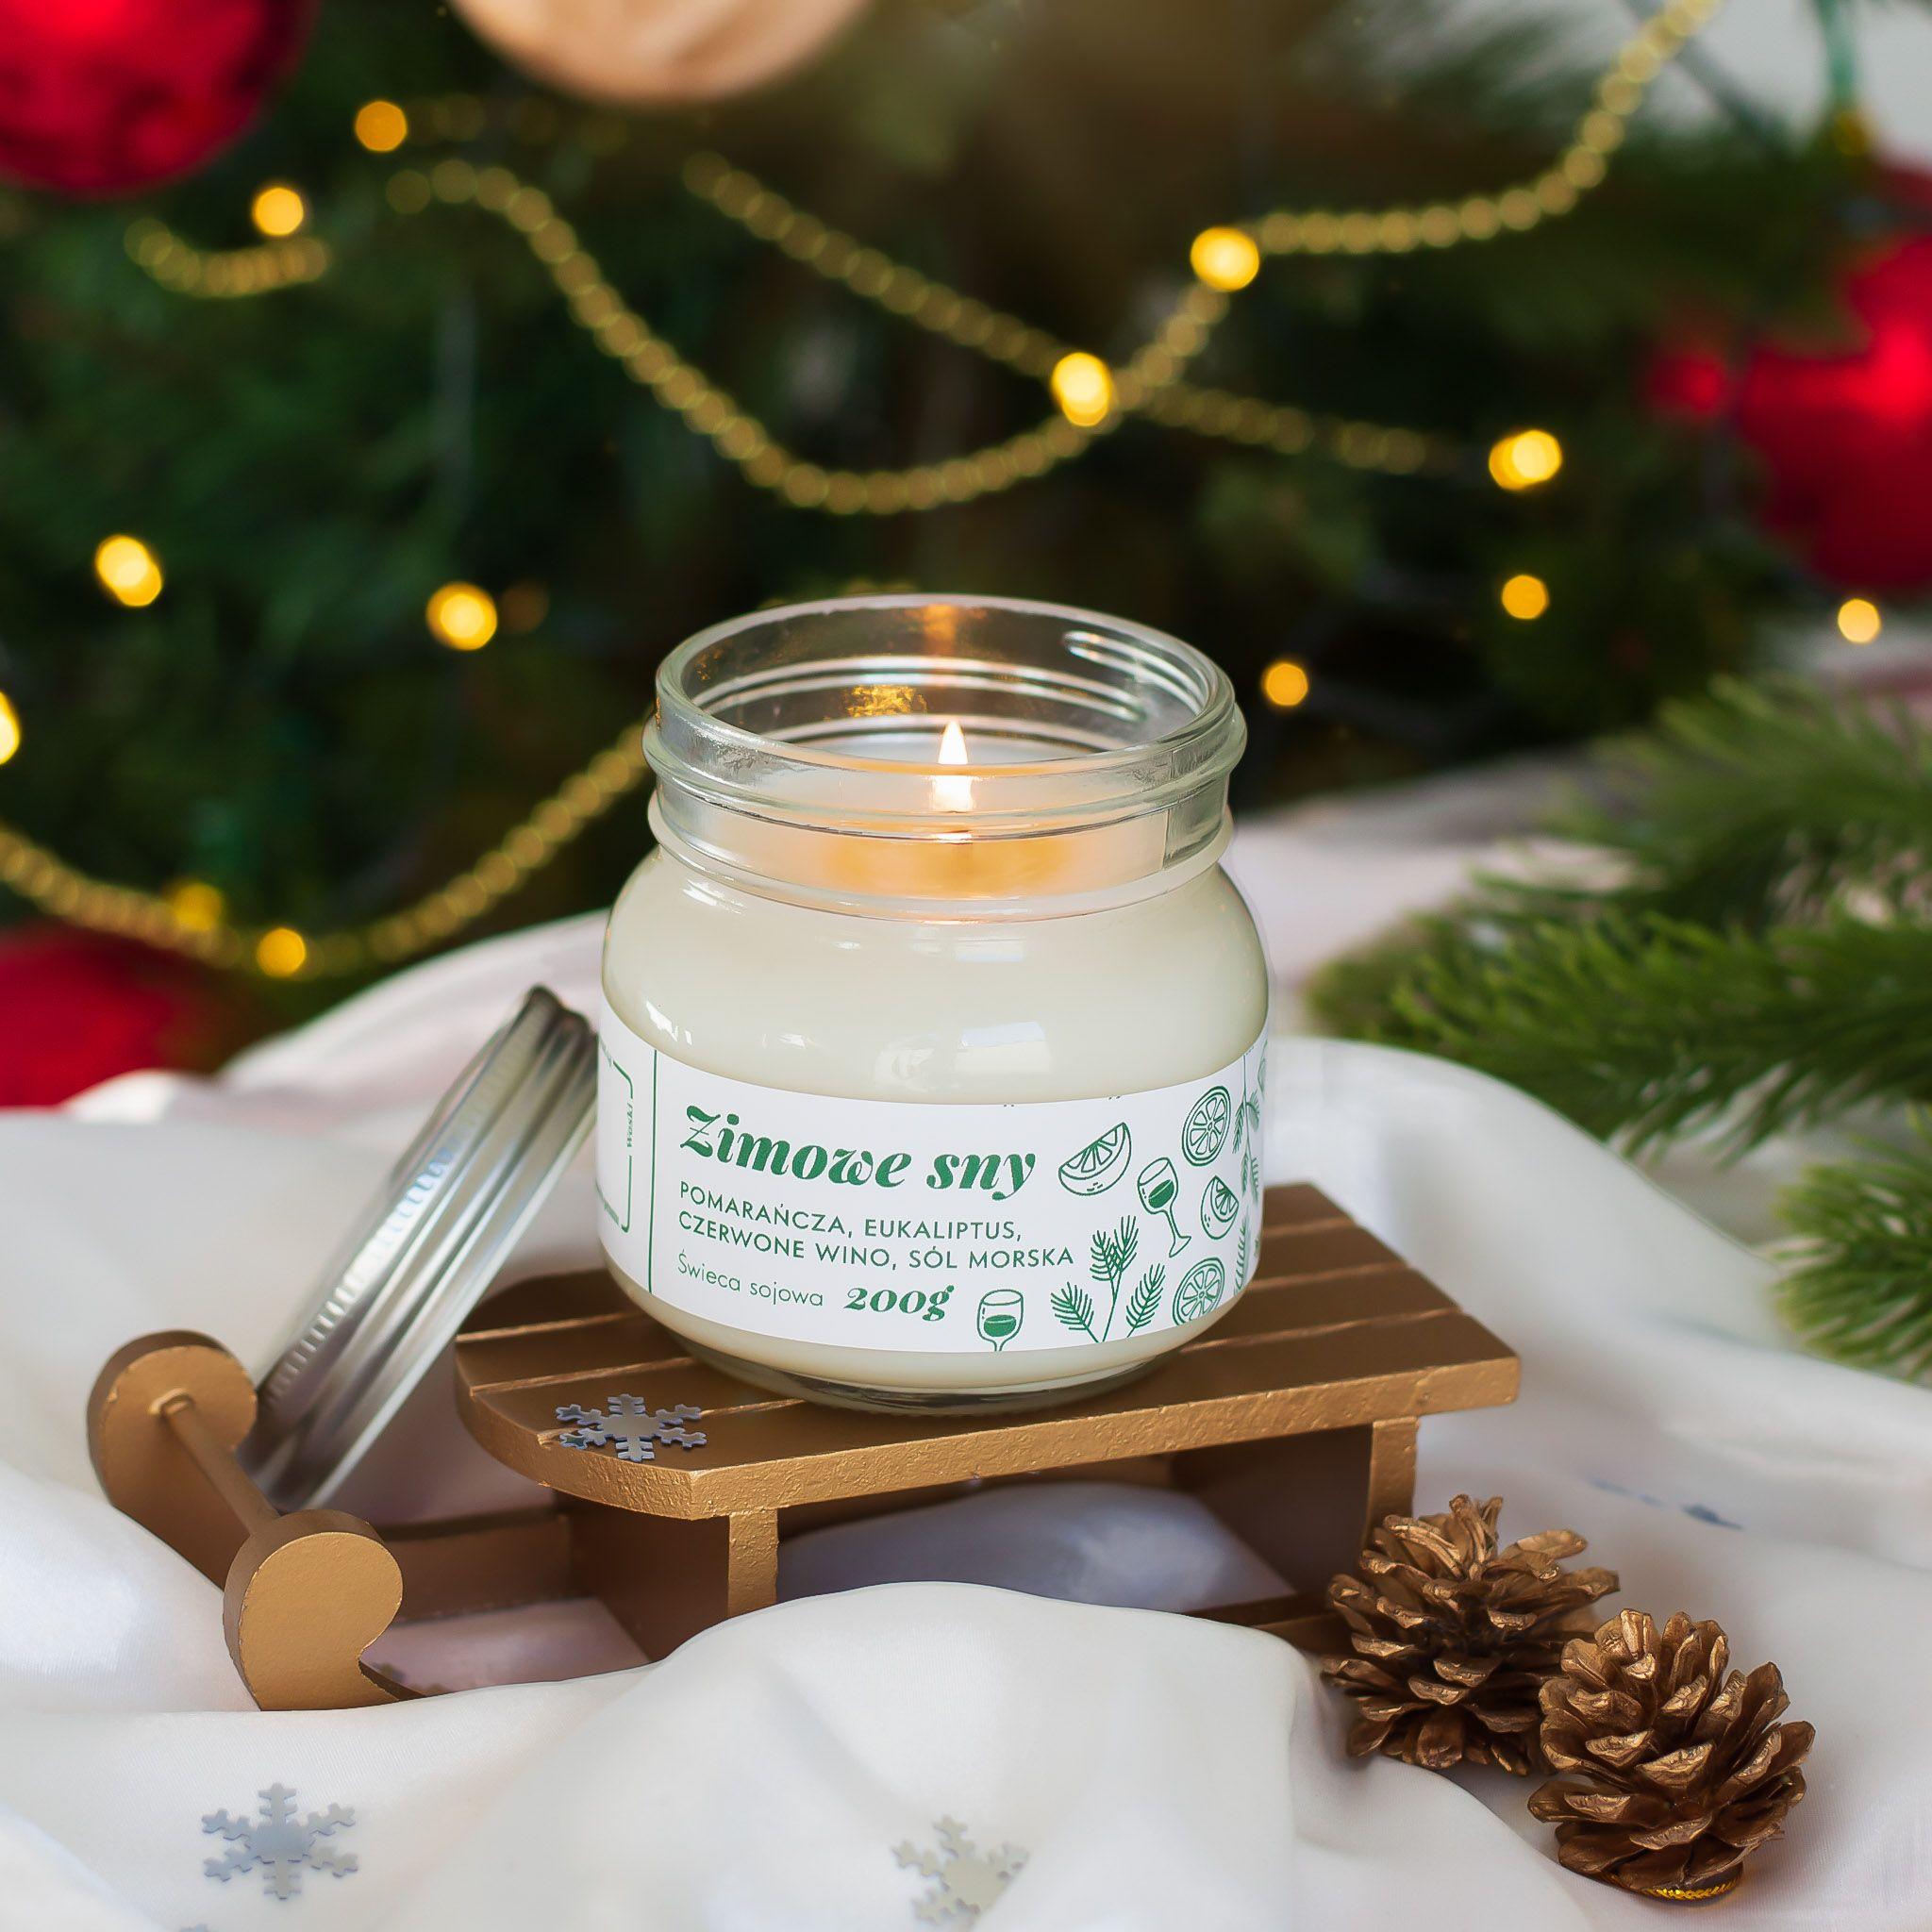 Scented candle Premium - Winter dreams / Polish product